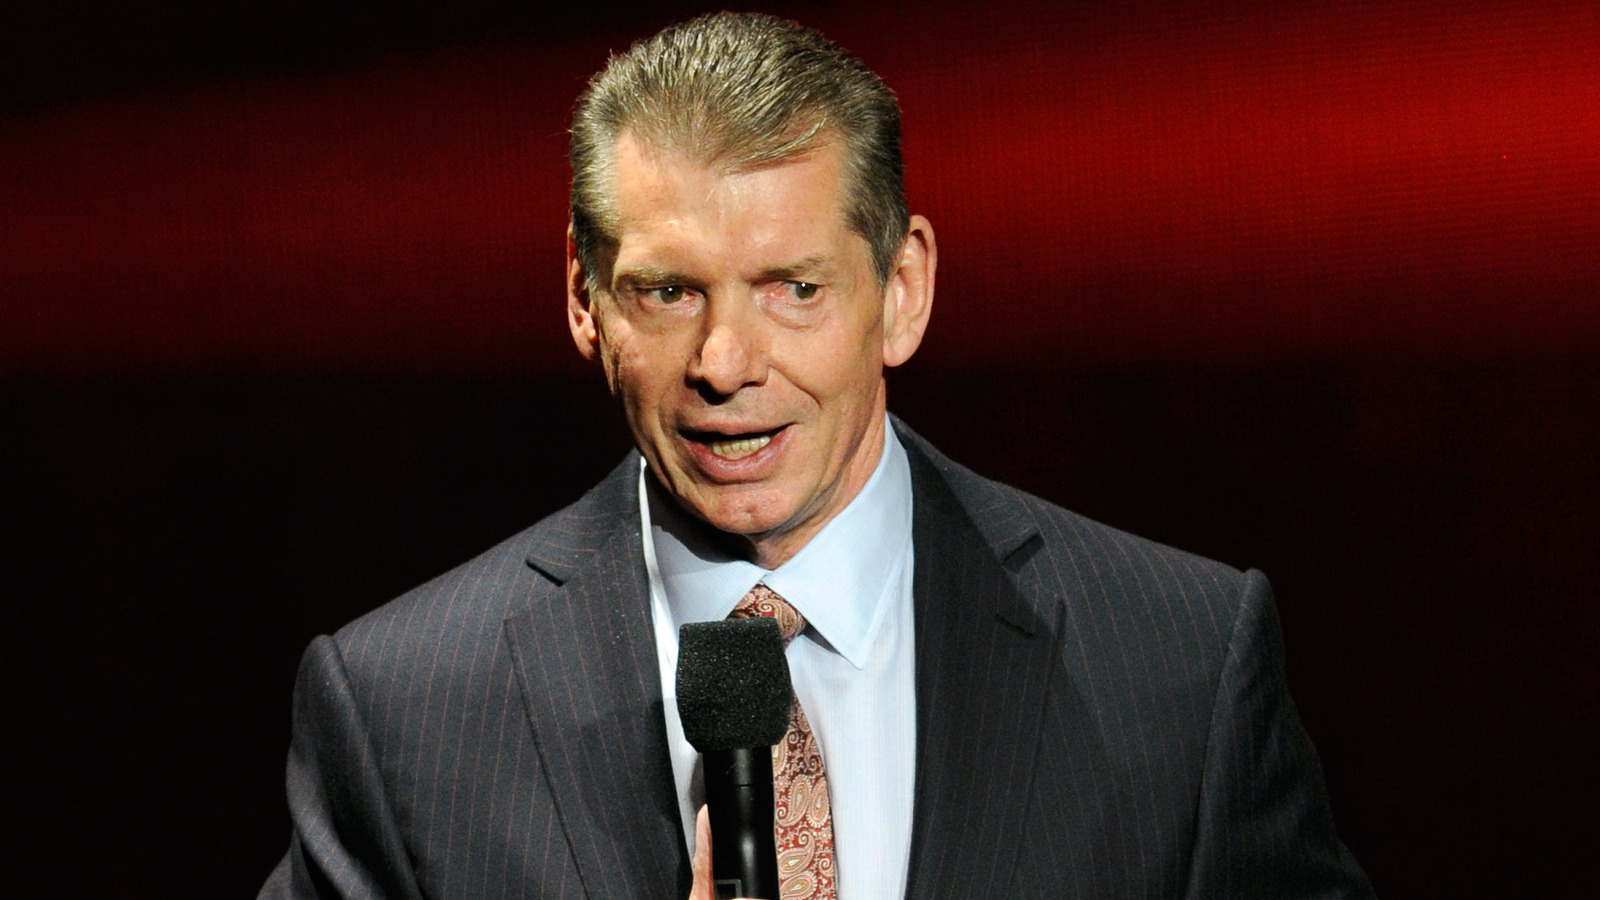 WWE's Vince McMahon Puts More Than 8 Million Shares Of Class A TKO Stock Up For Sale